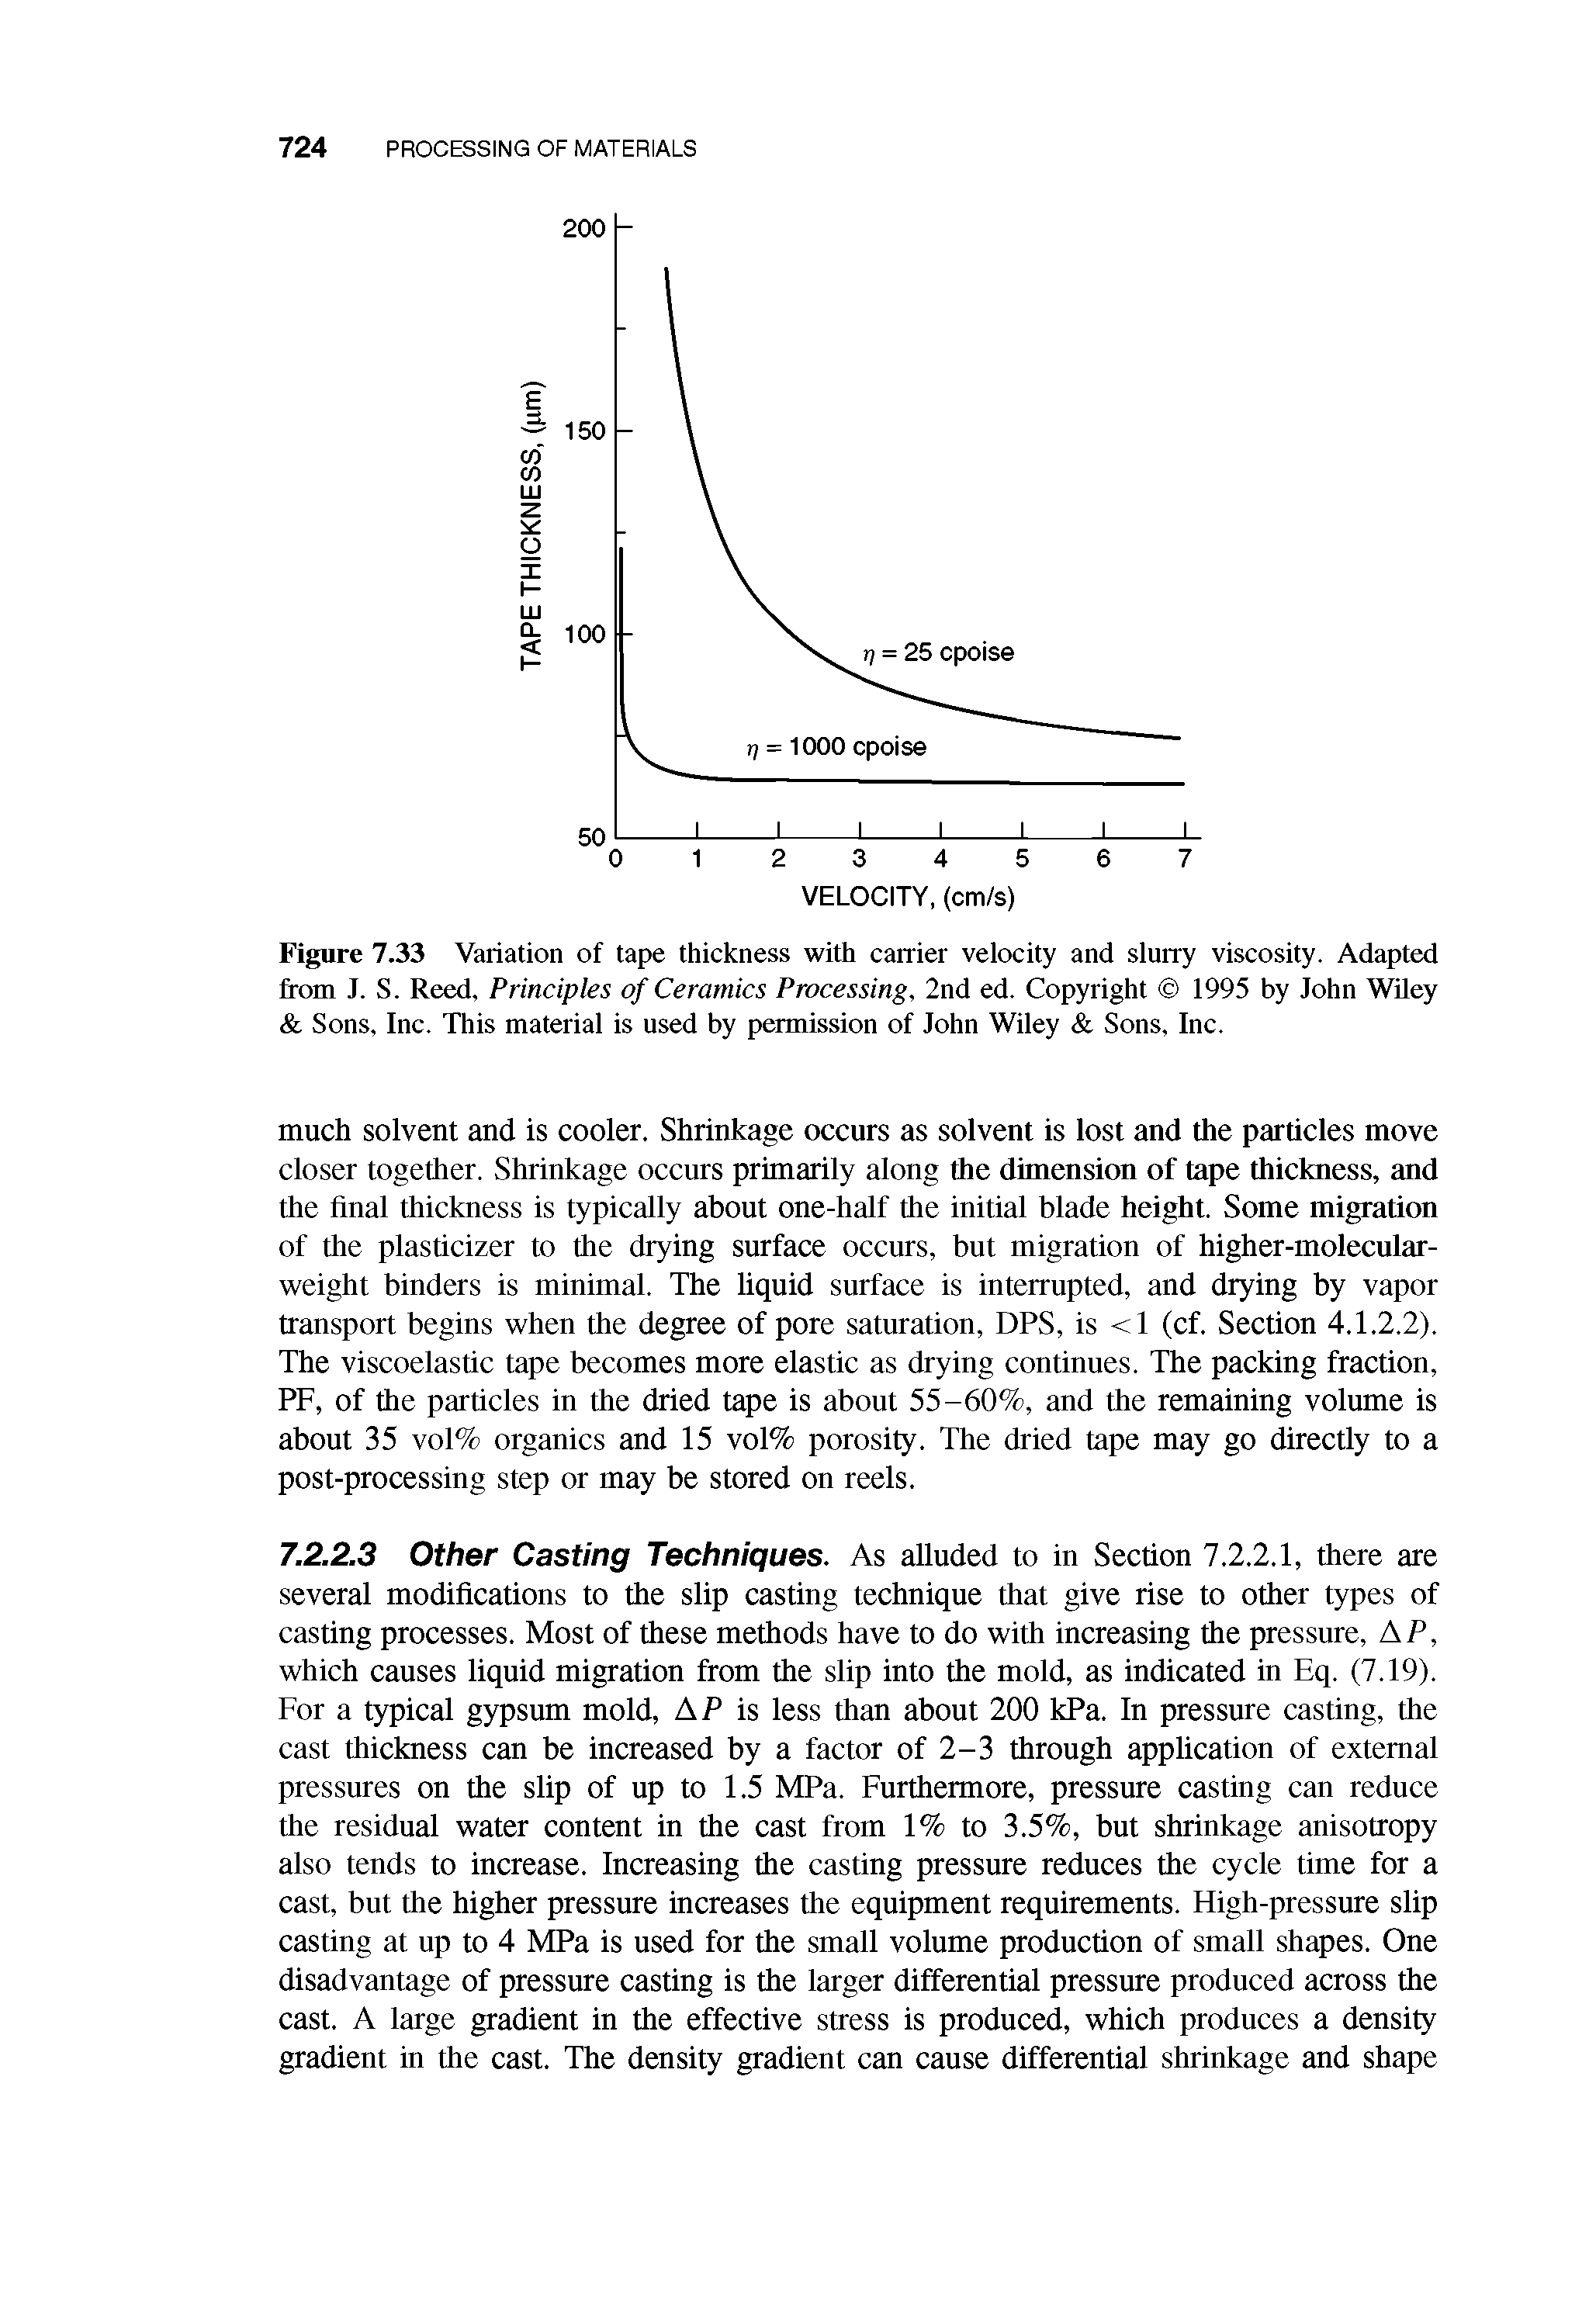 Figure 7.33 Variation of tape thickness with carrier velocity and slurry viscosity. Adapted from J. S. Reed, Principles of Ceramics Processing, 2nd ed. Copyright 1995 by John Wiley Sons, Inc. This material is used by permission of John Wiley Sons, Inc.